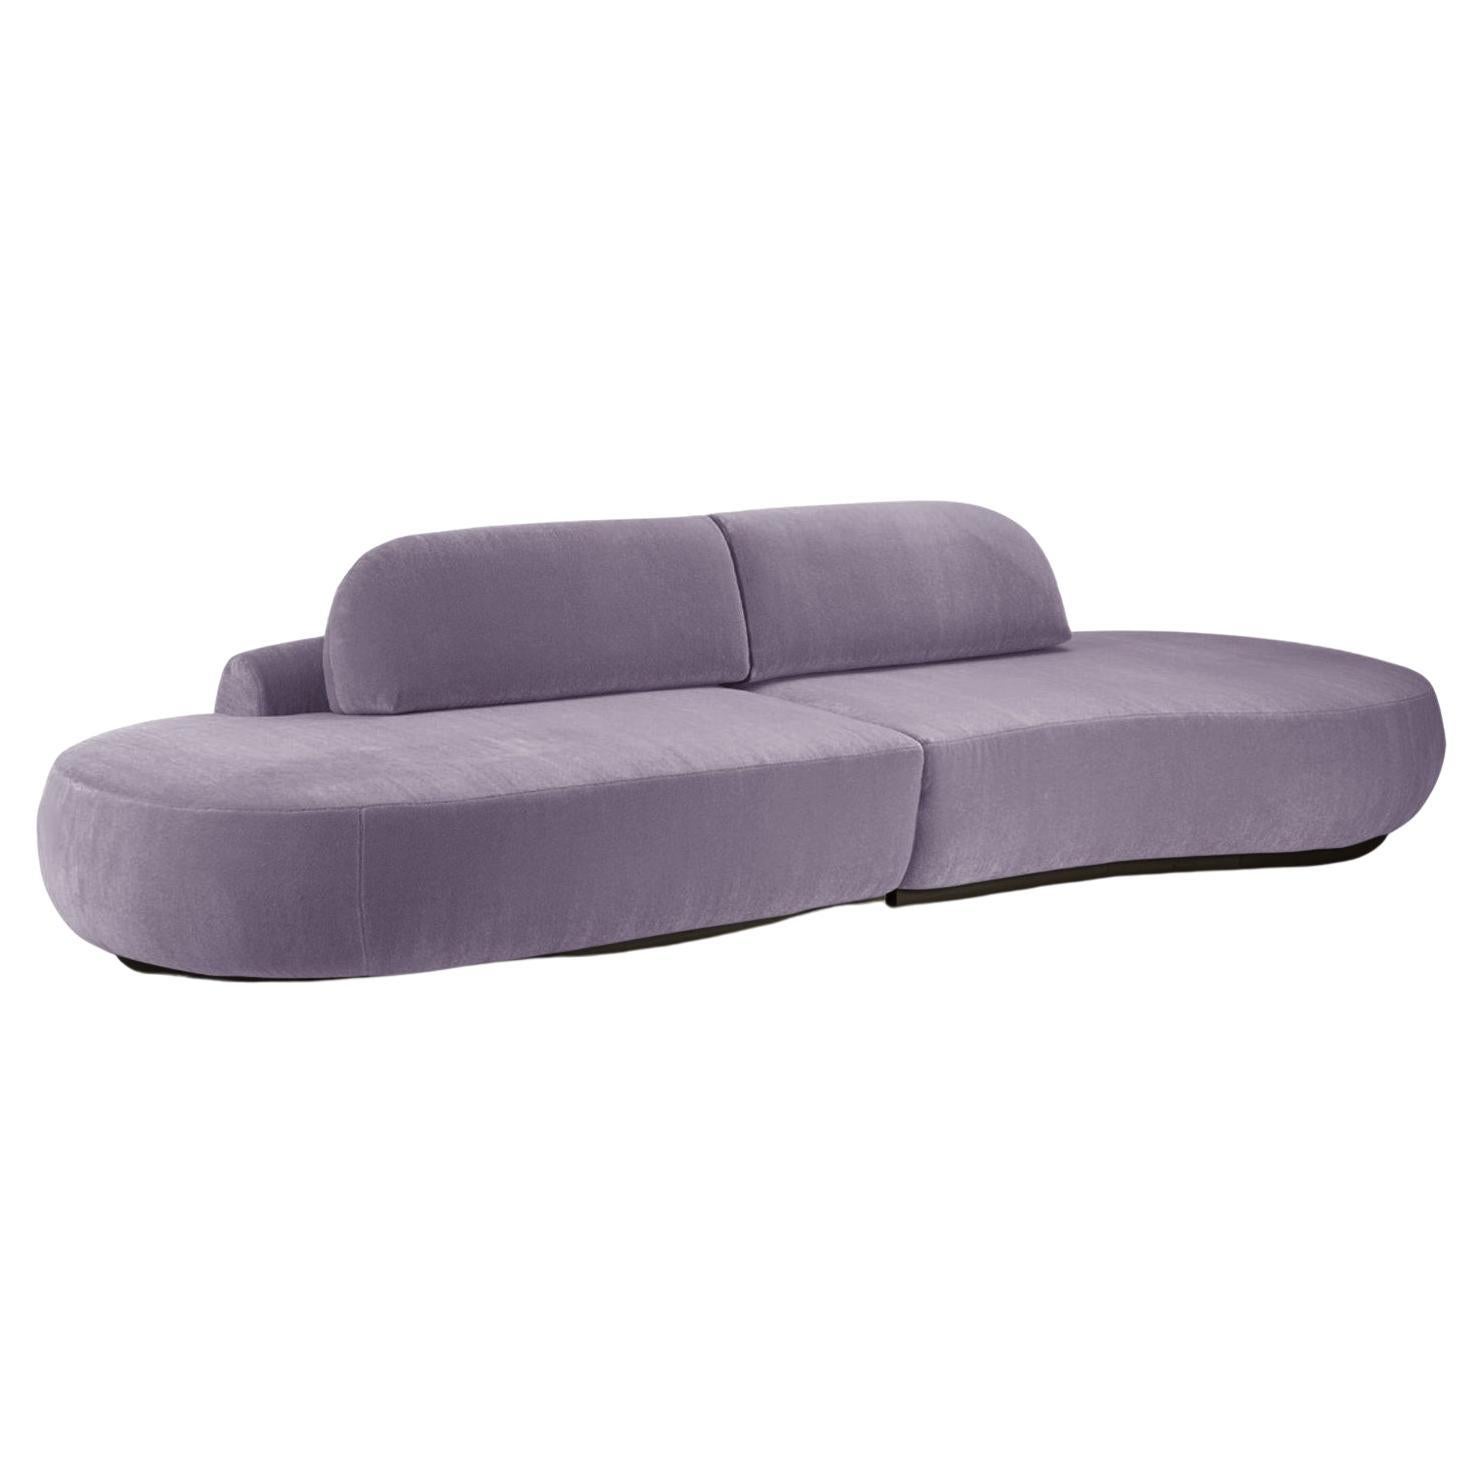 Naked Curved Sectional Sofa, 2 Piece with Beech Ash-056-5 and Paris Lavanda For Sale